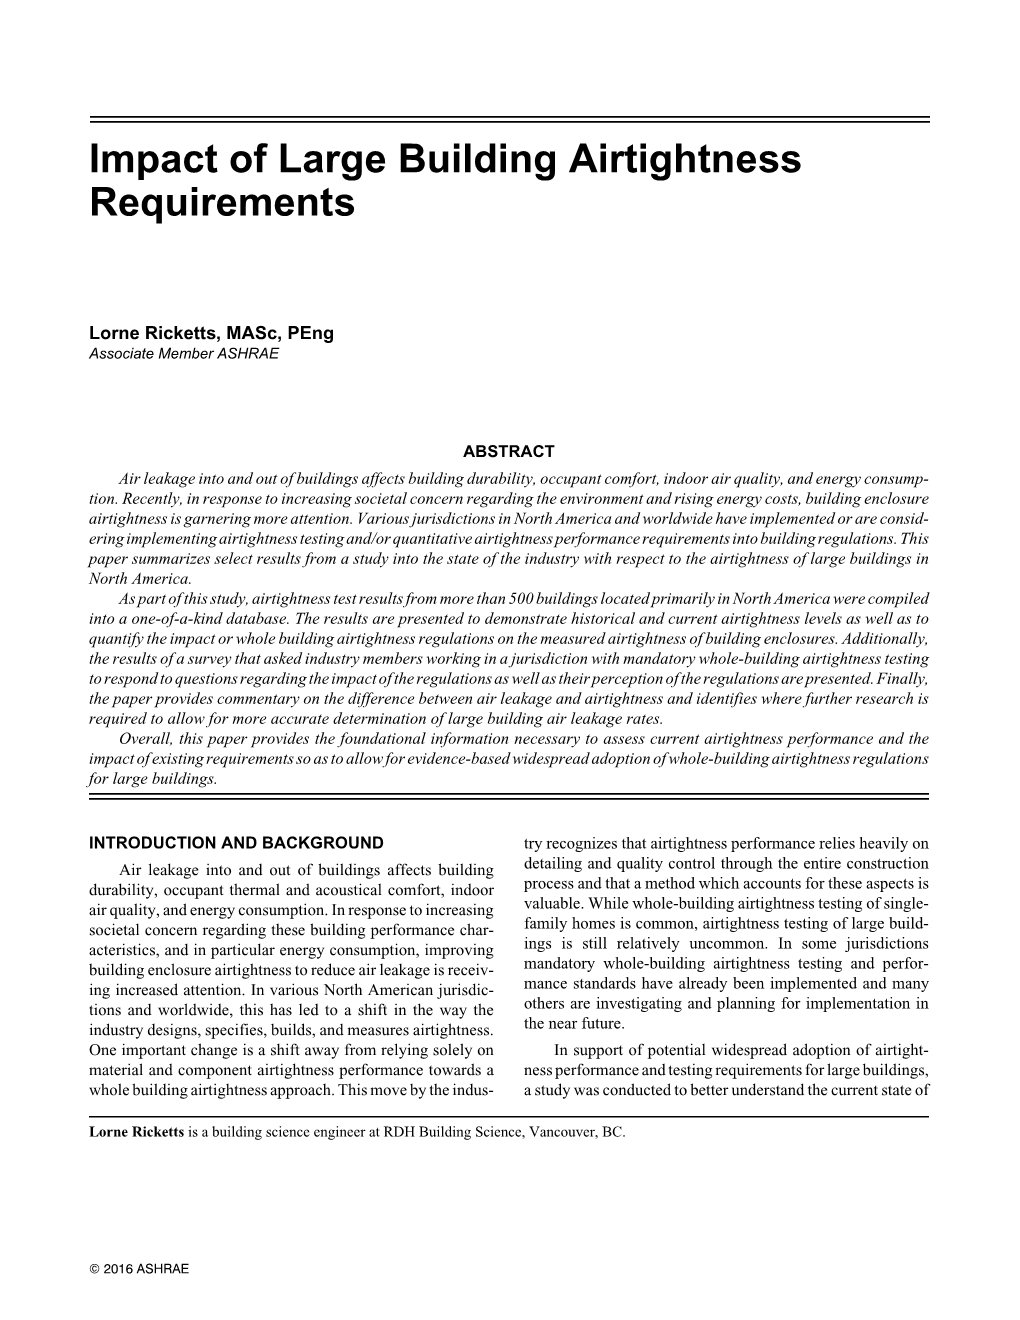 Impact of Large Building Airtightness Requirements